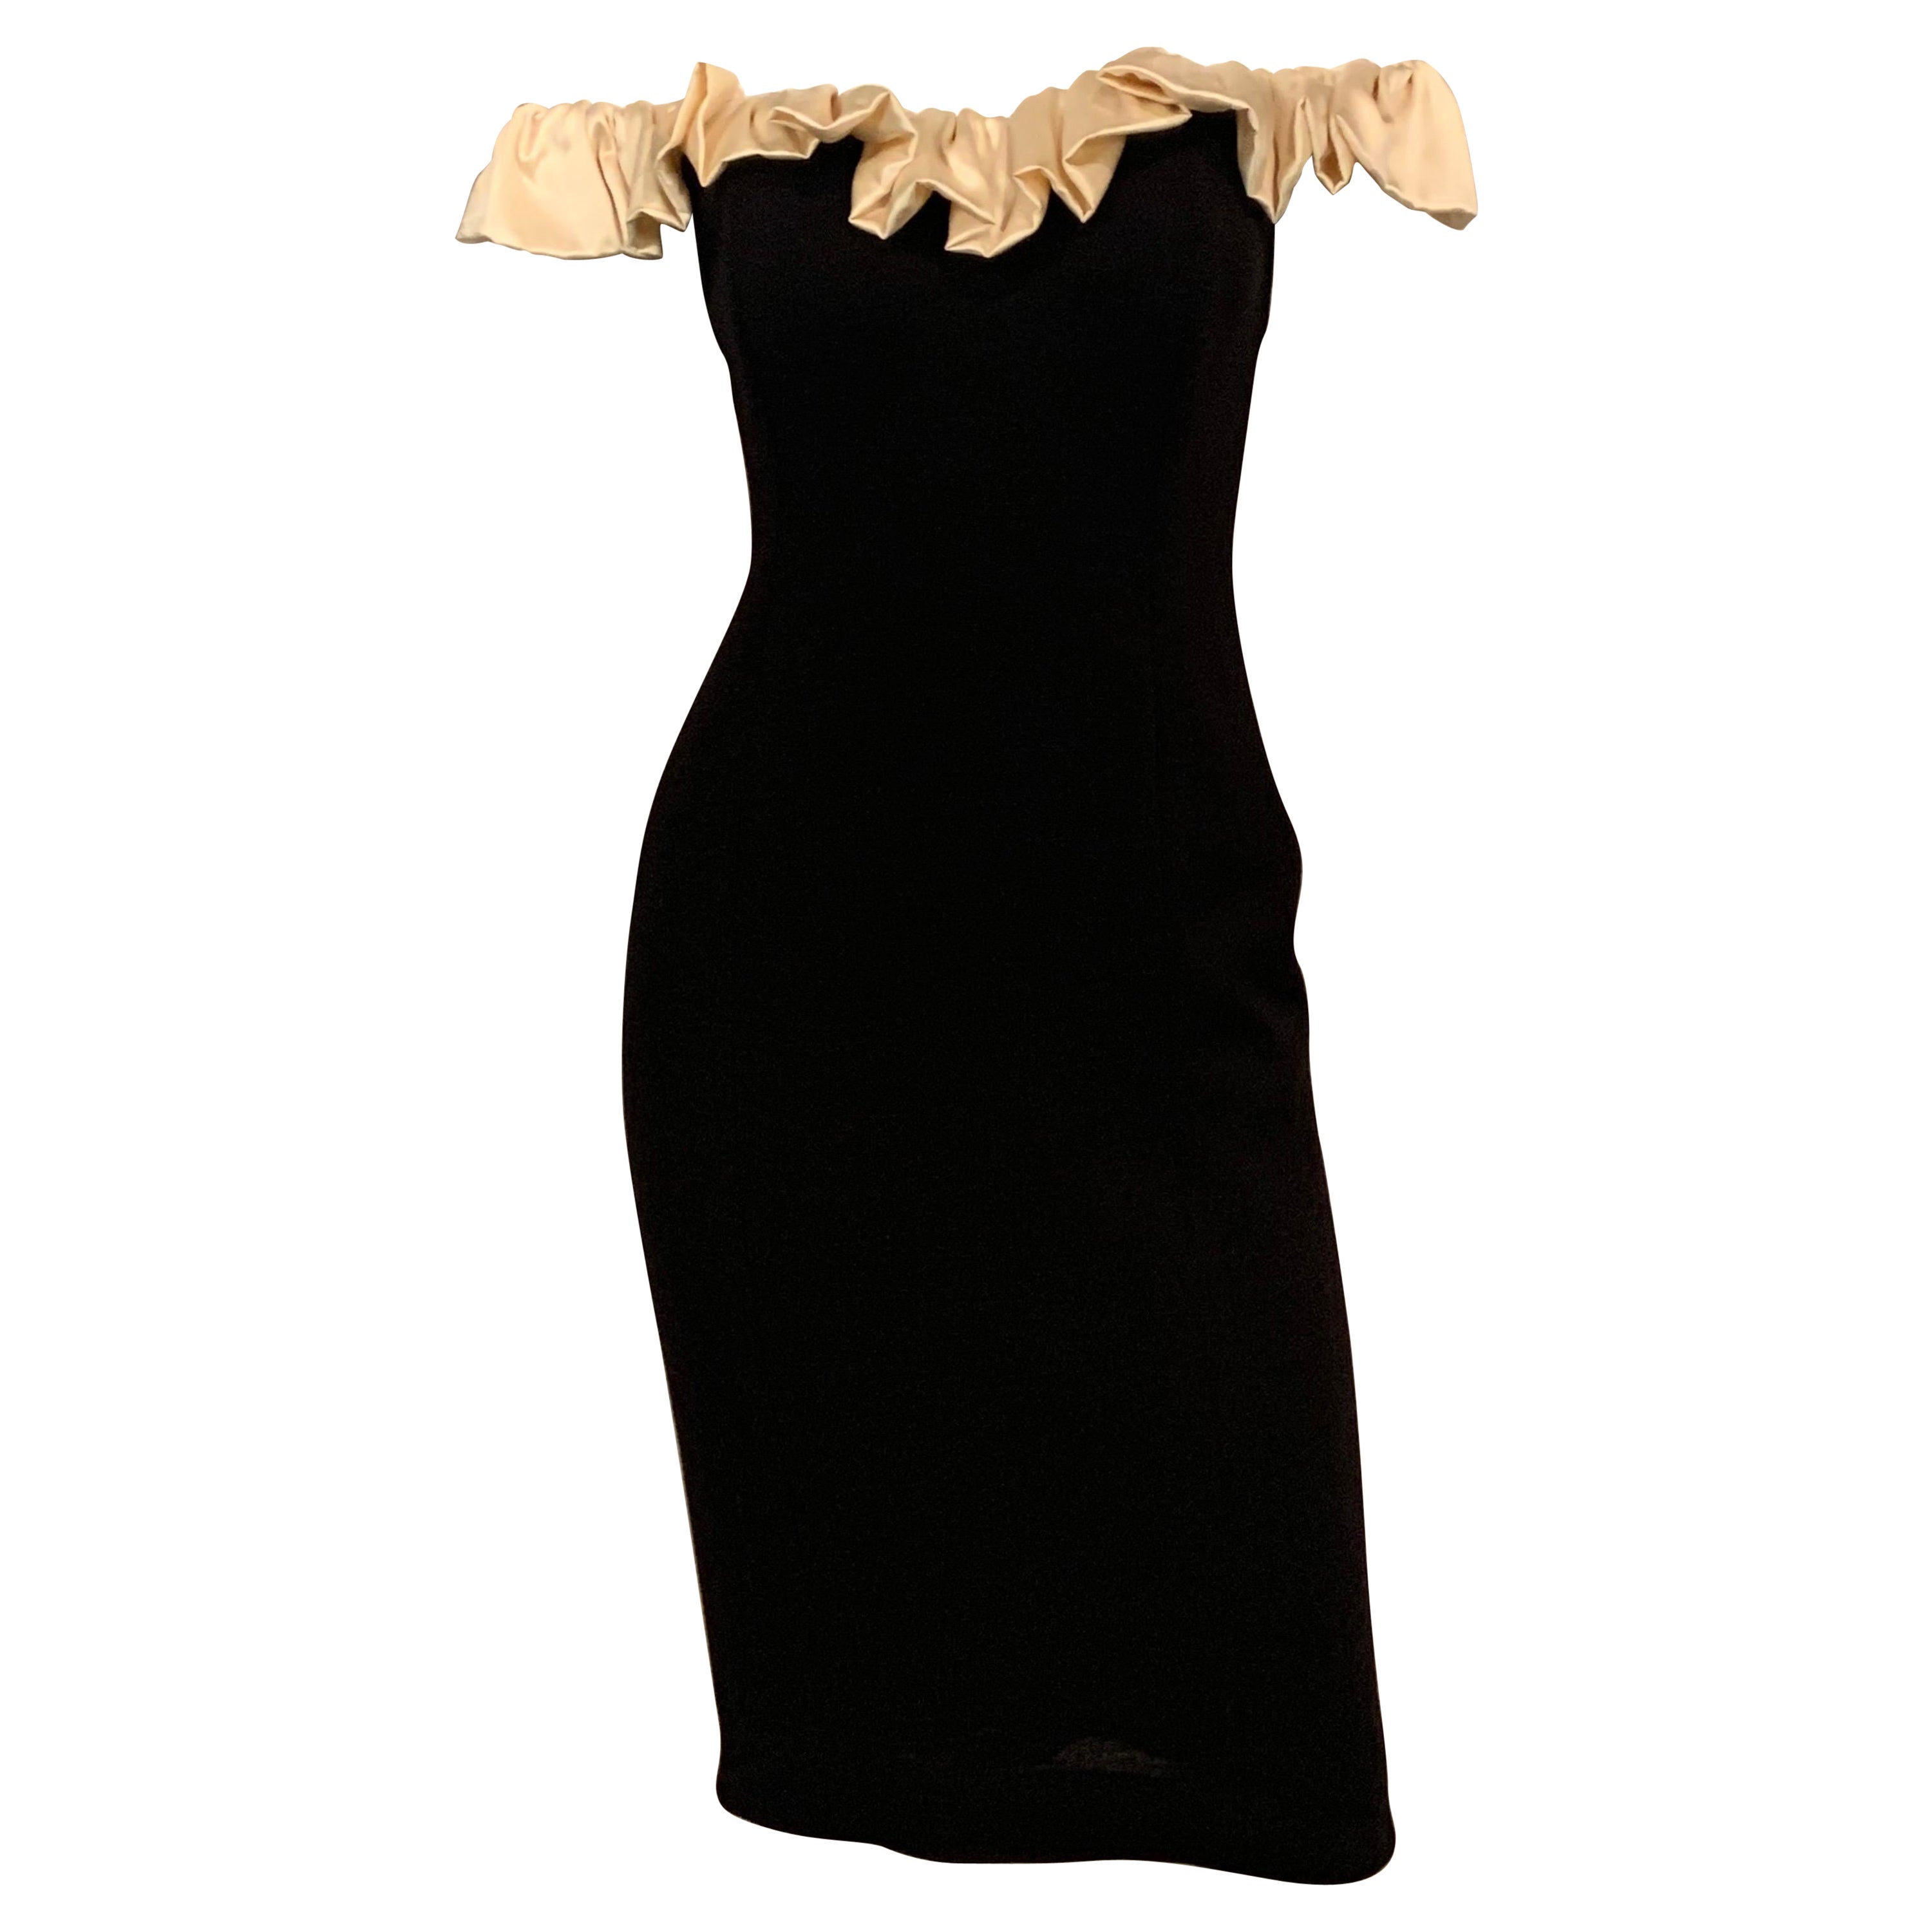 Black Wool Dress with Off the Shoulder Cream Satin Ruffled Neckline For Sale